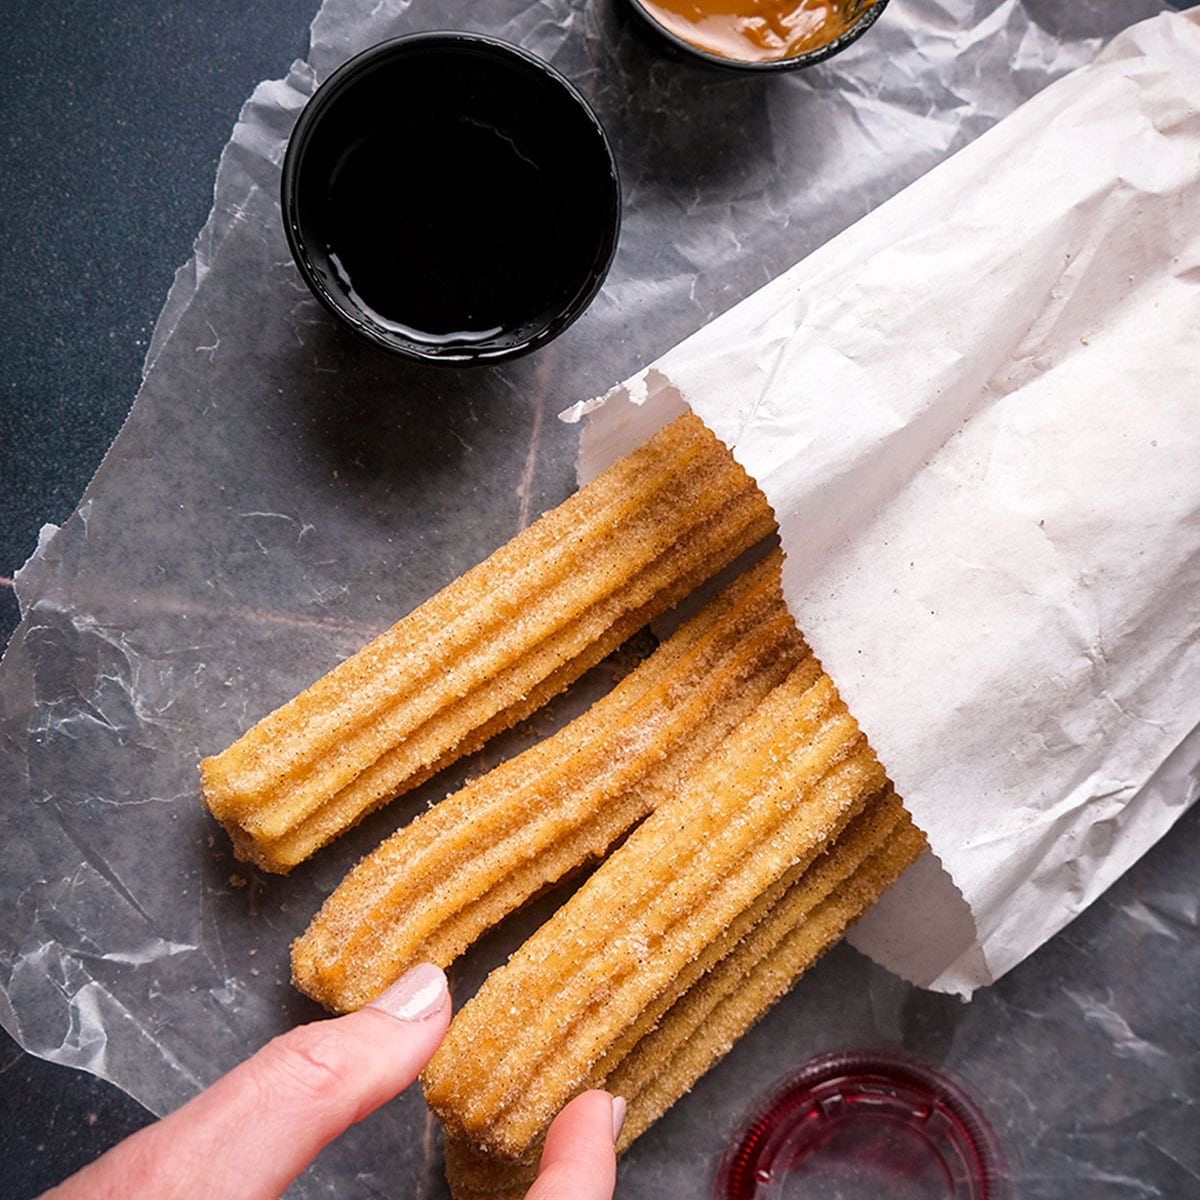 Churros are fried dough pastries that originate from Spain. They are traditionally made by piping dough into hot oil, resulting in a crispy on the outside and soft on the inside.